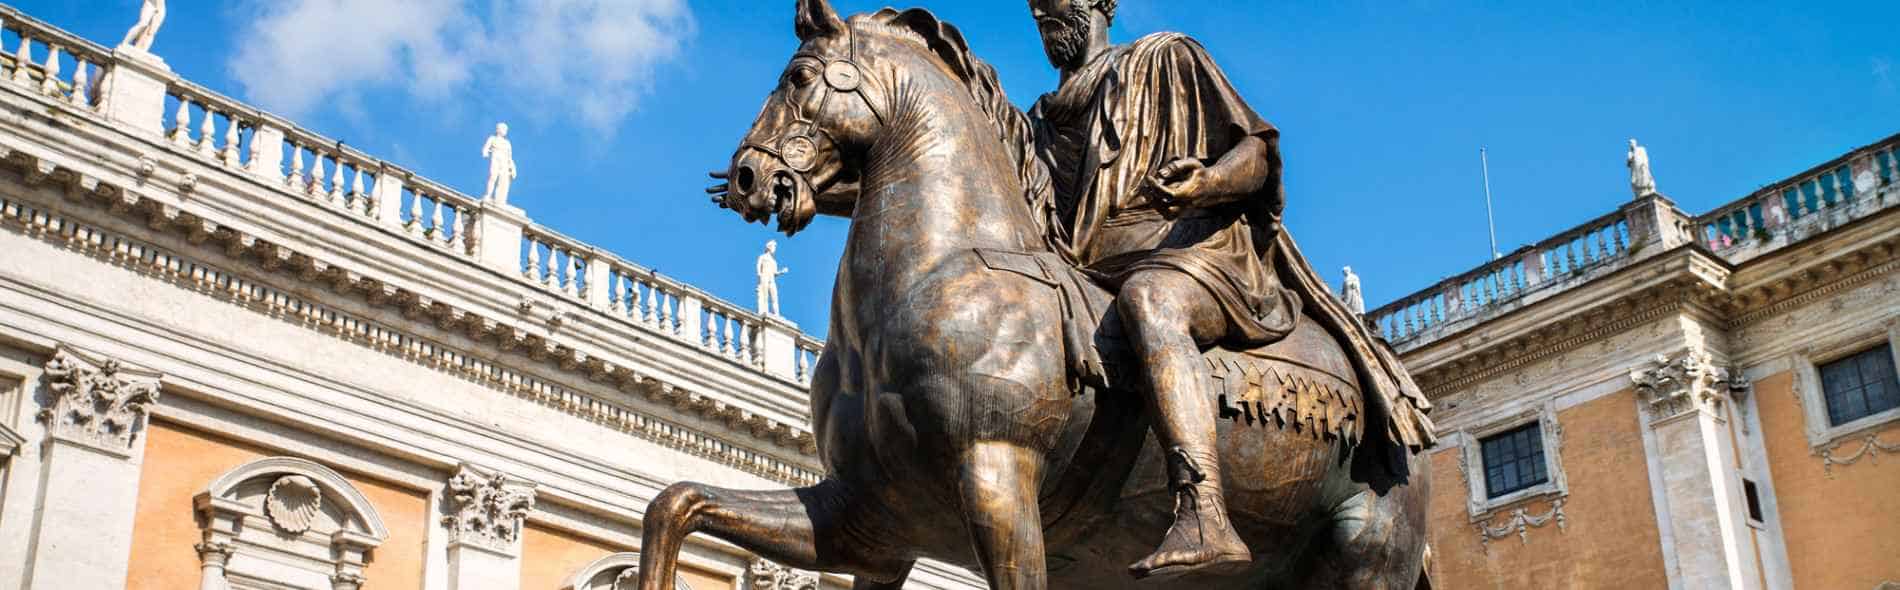 Capitoline Museums, professional private tour guides